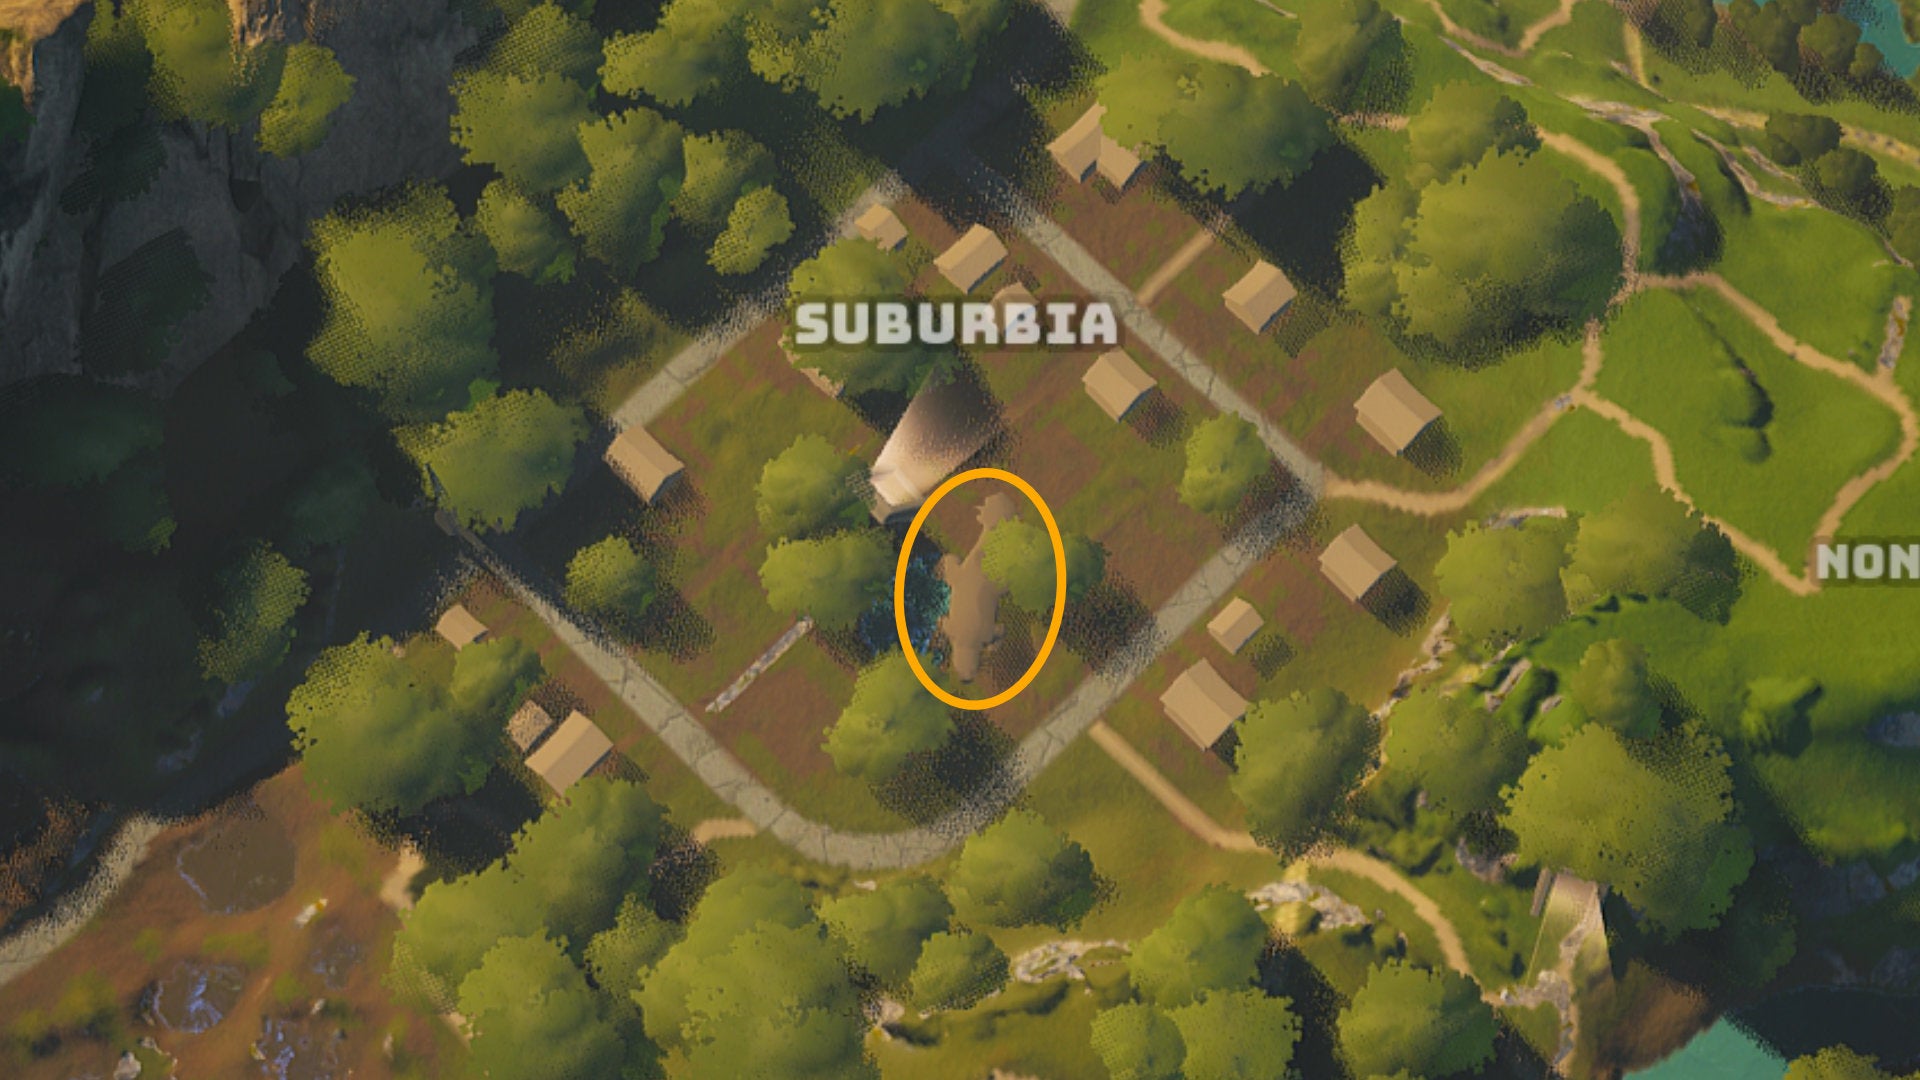 A screenshot of Suburbia on the Biomutant map, with the area's monster highlighted.